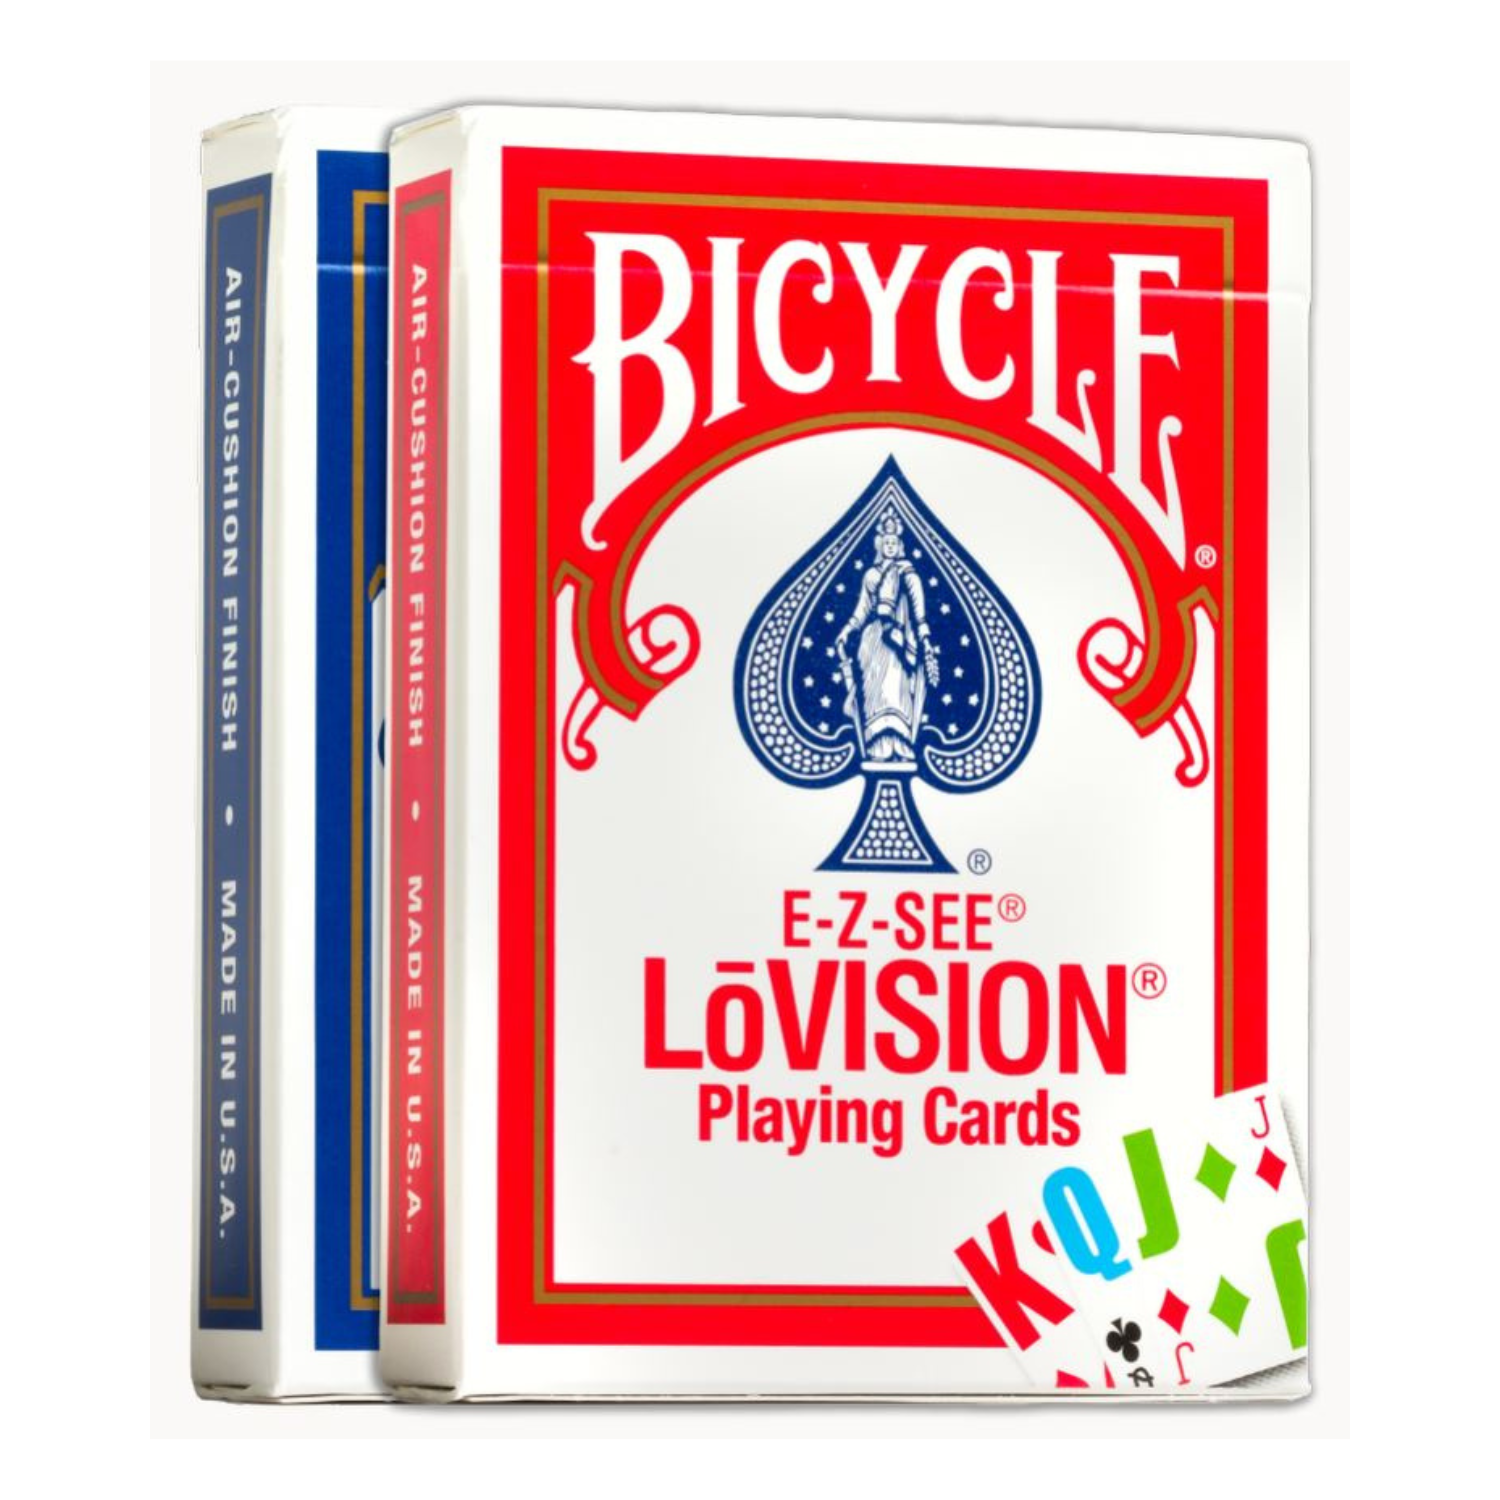 Image of two packs of Bicycle e-z-see lo-vision playing cards